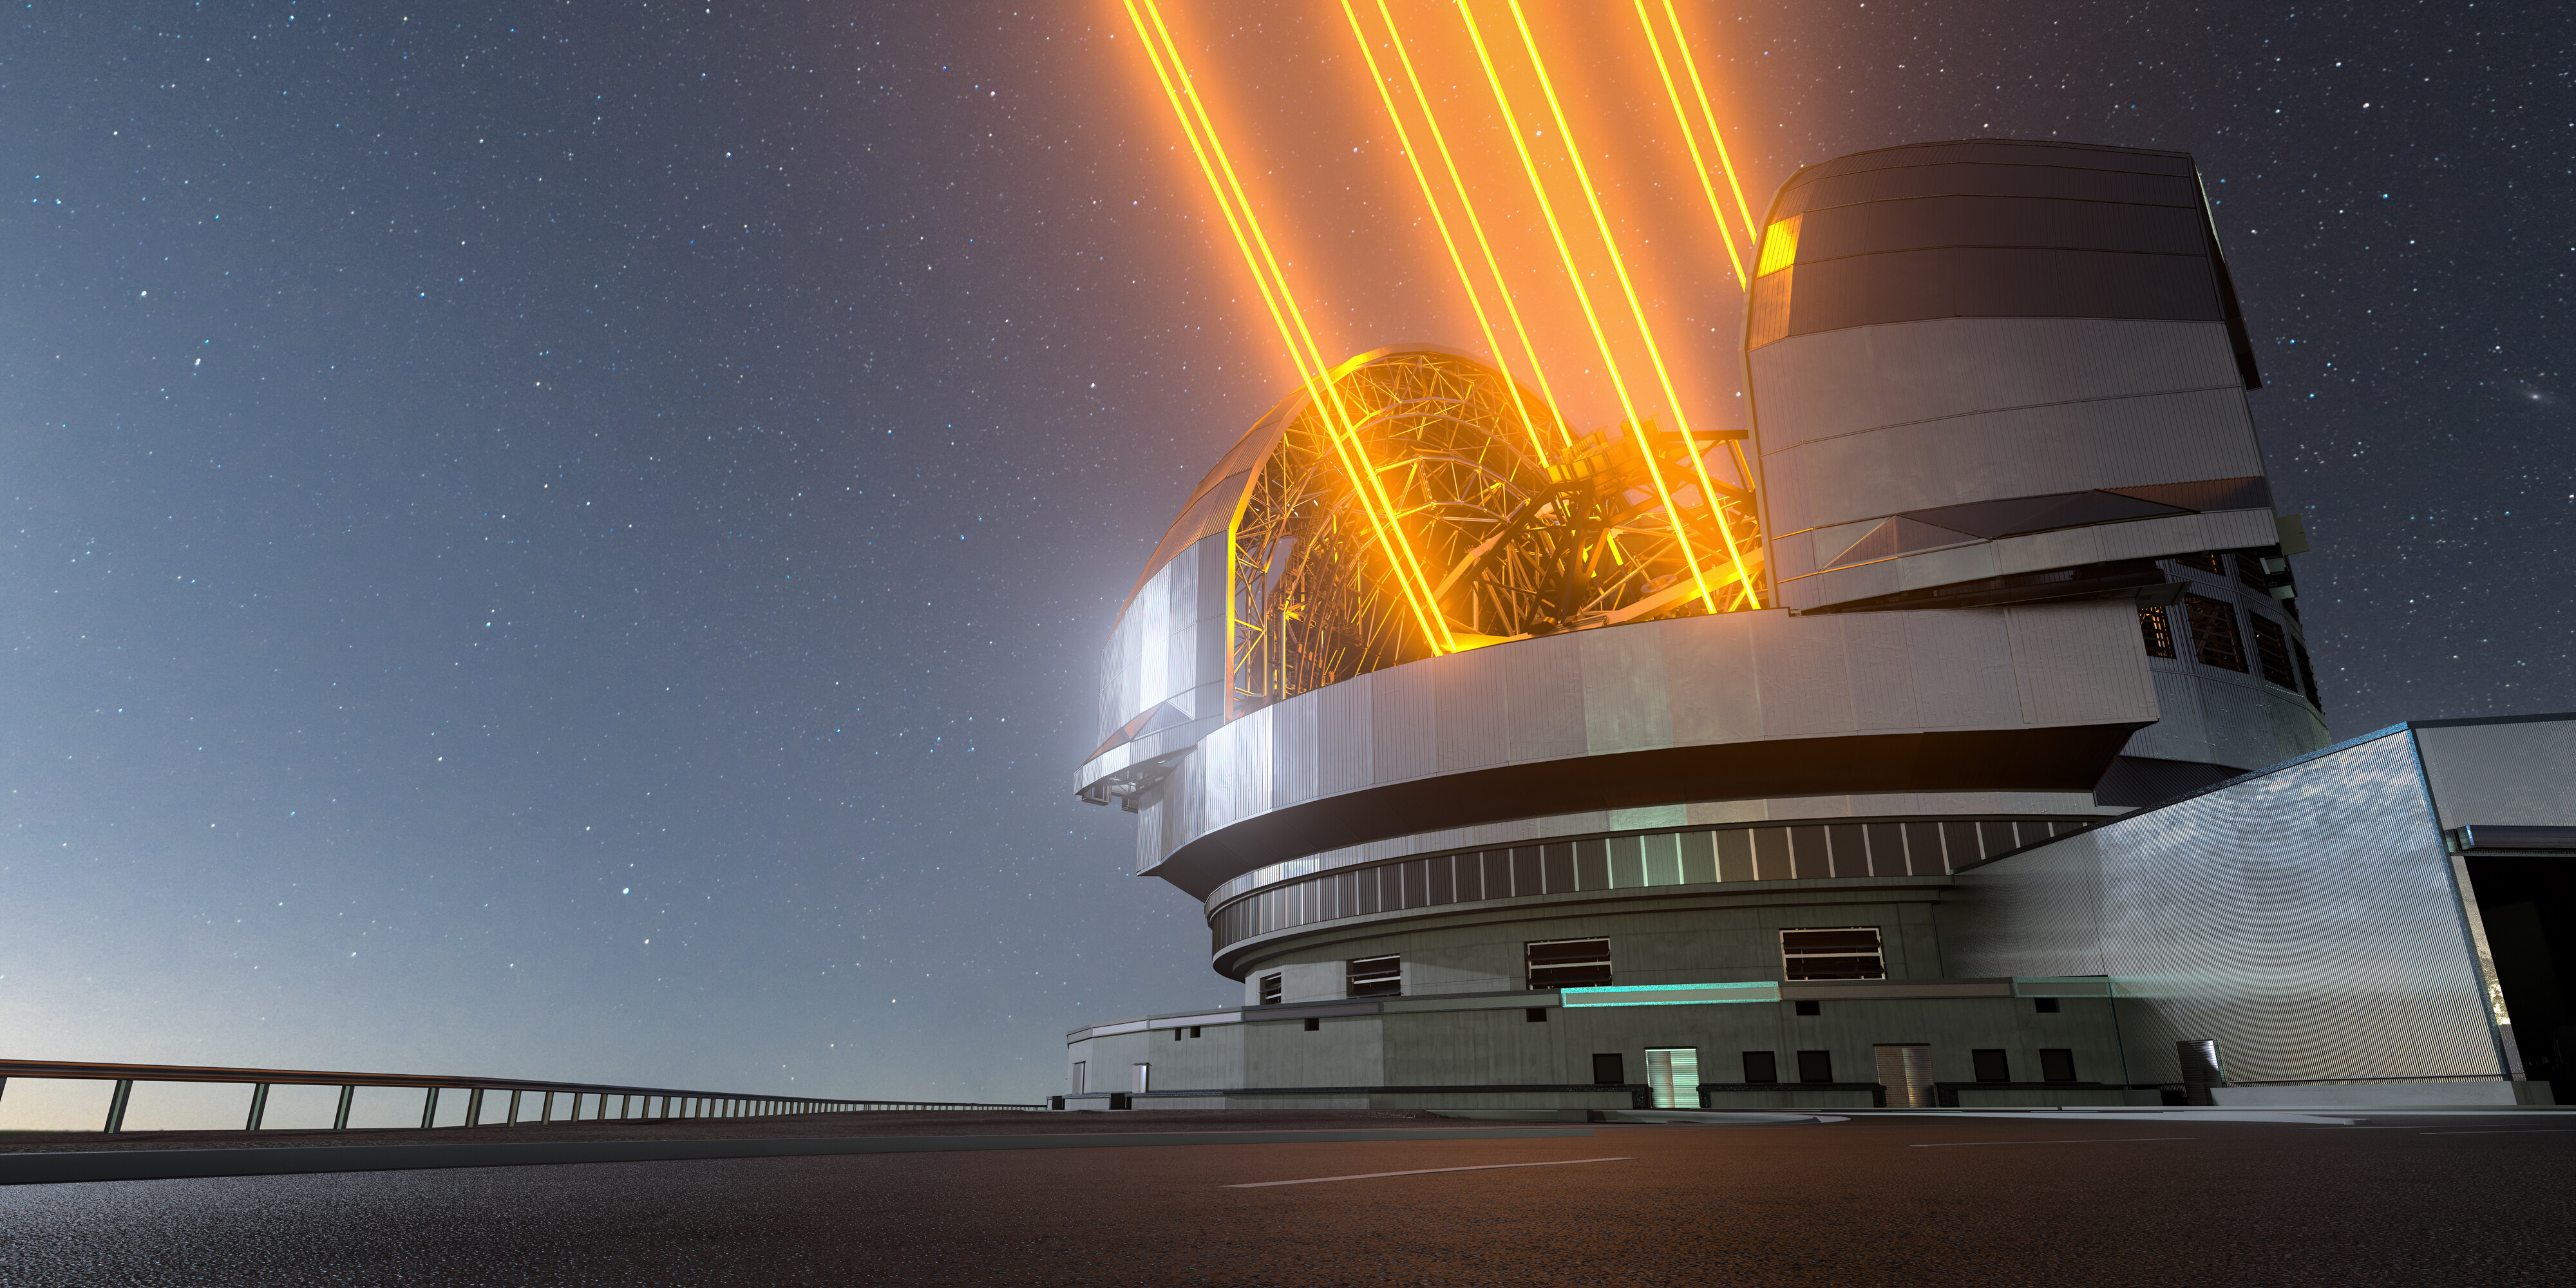 Rise Of A Giant The Extremely Large Telescope The Royal Astronomical